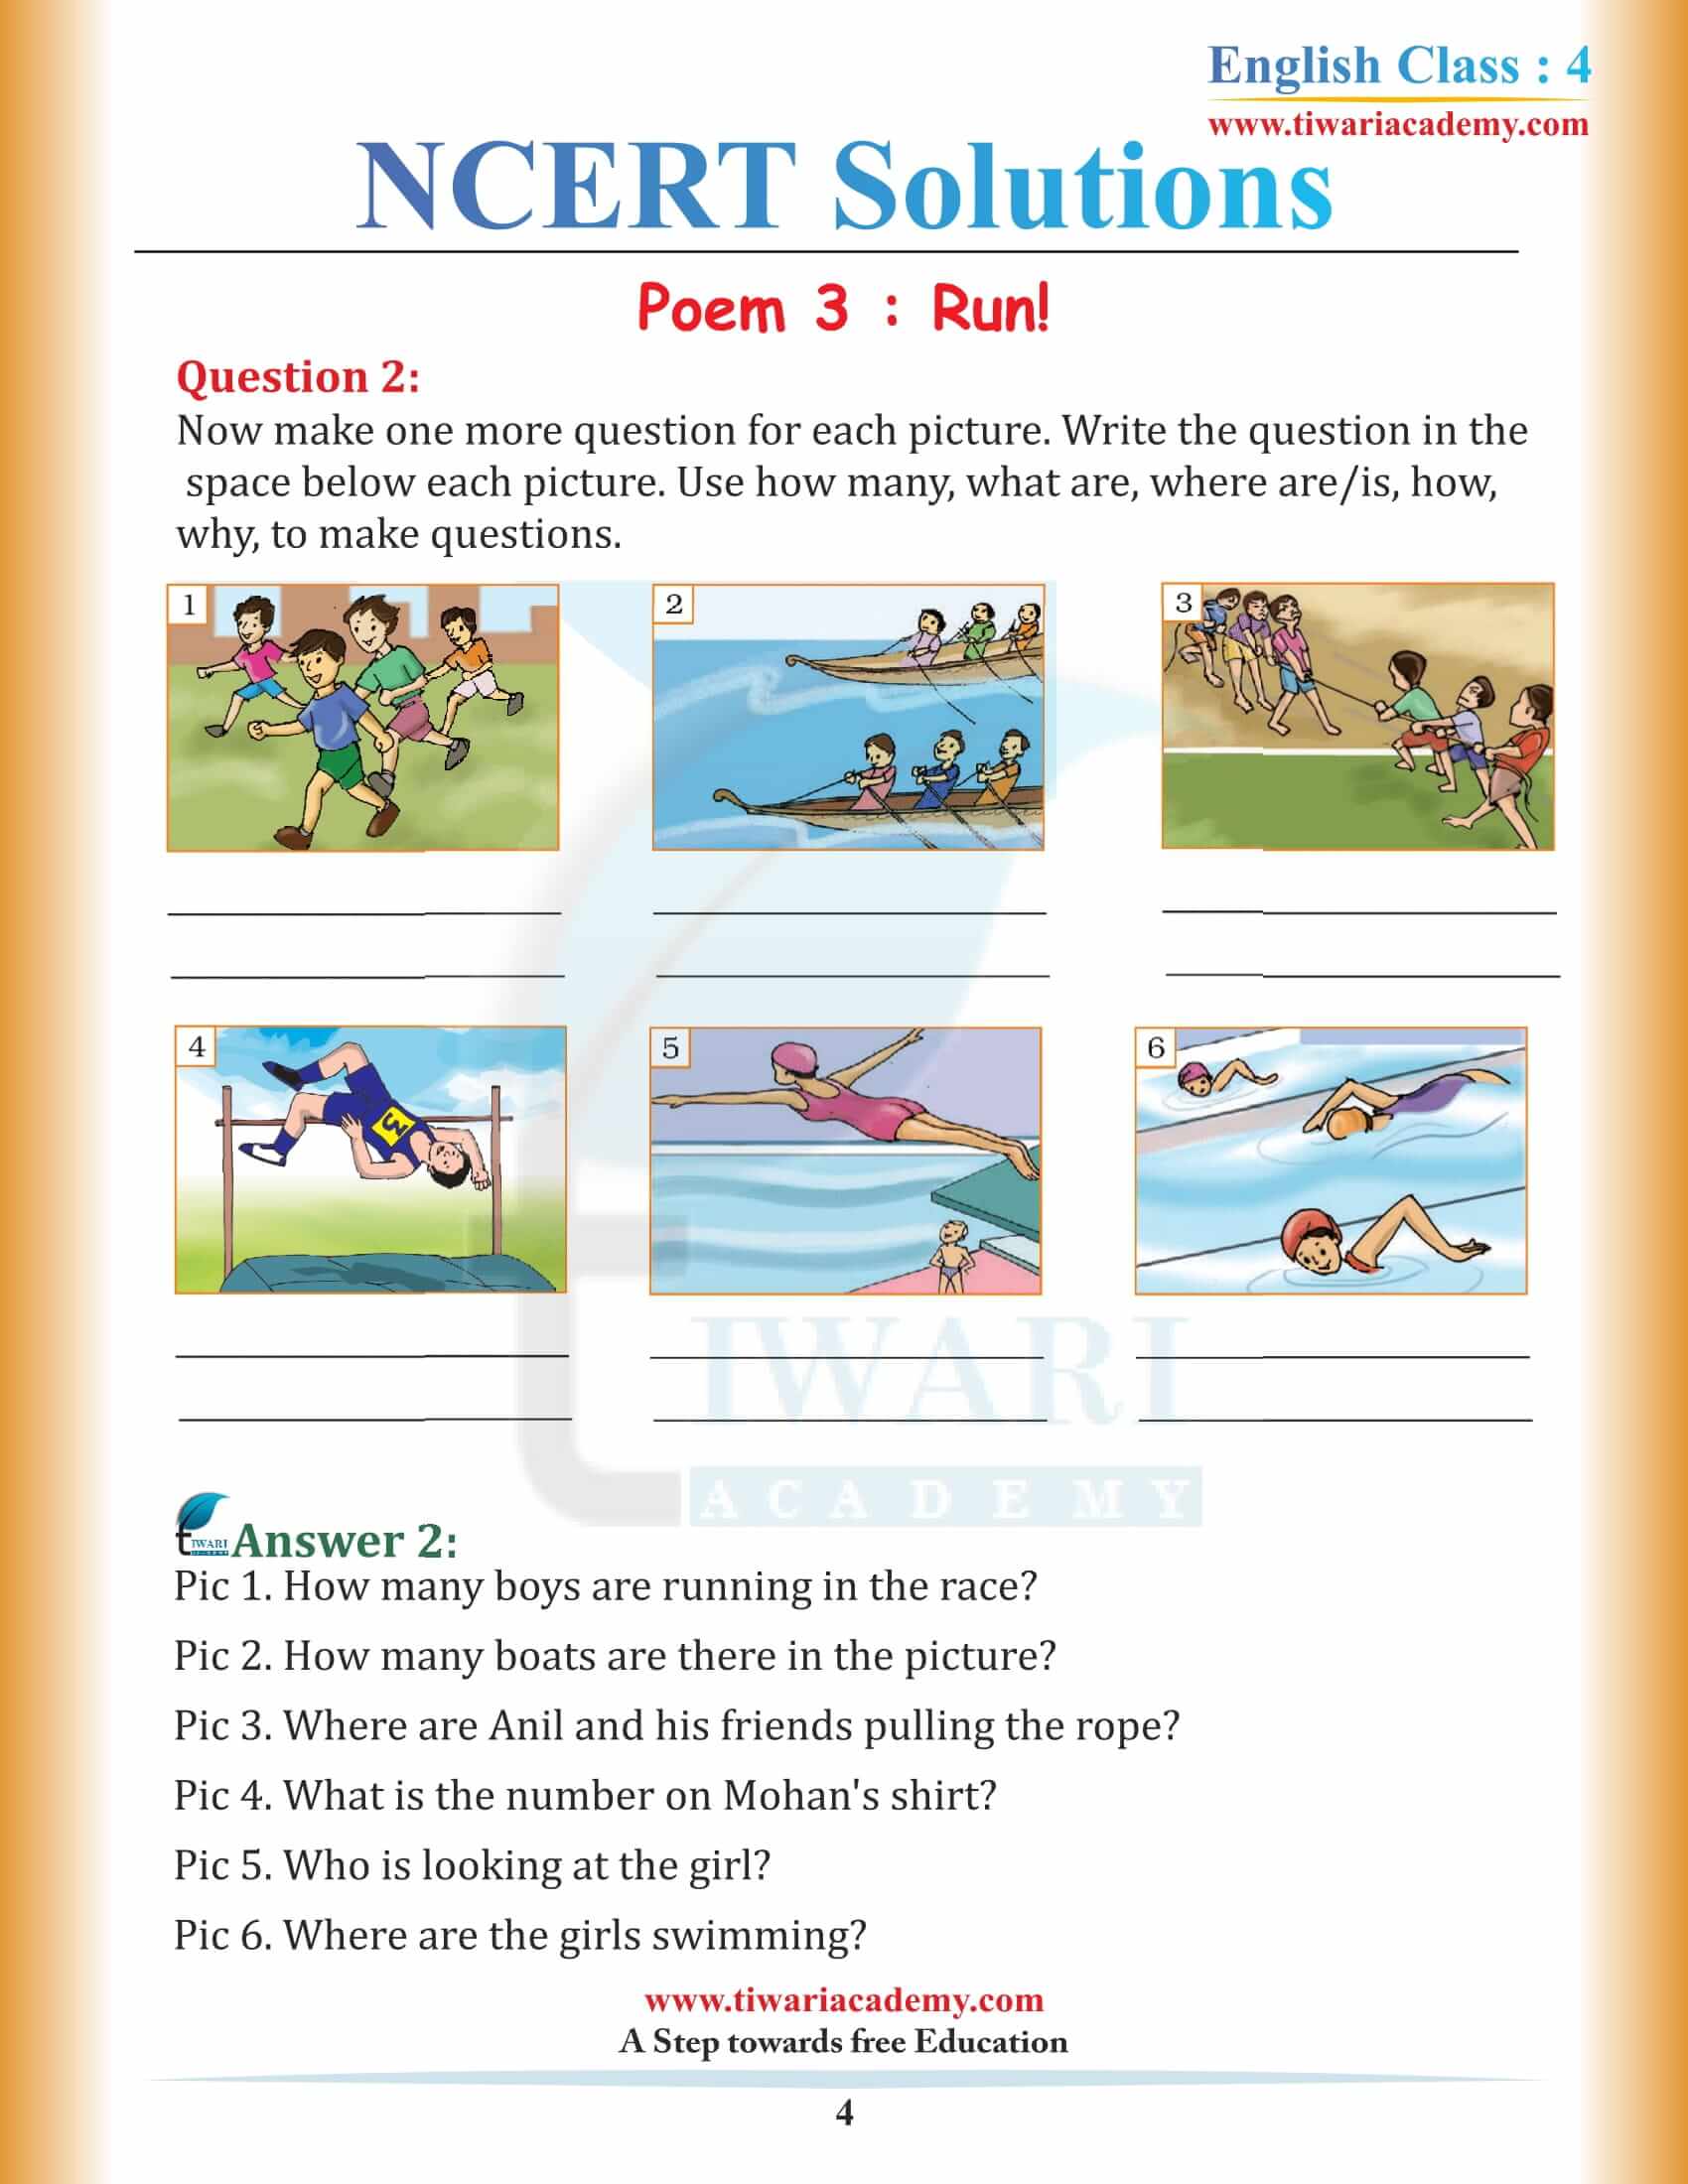 NCERT Solutions for Class 4 English Unit 3 Chapter 1 question answers